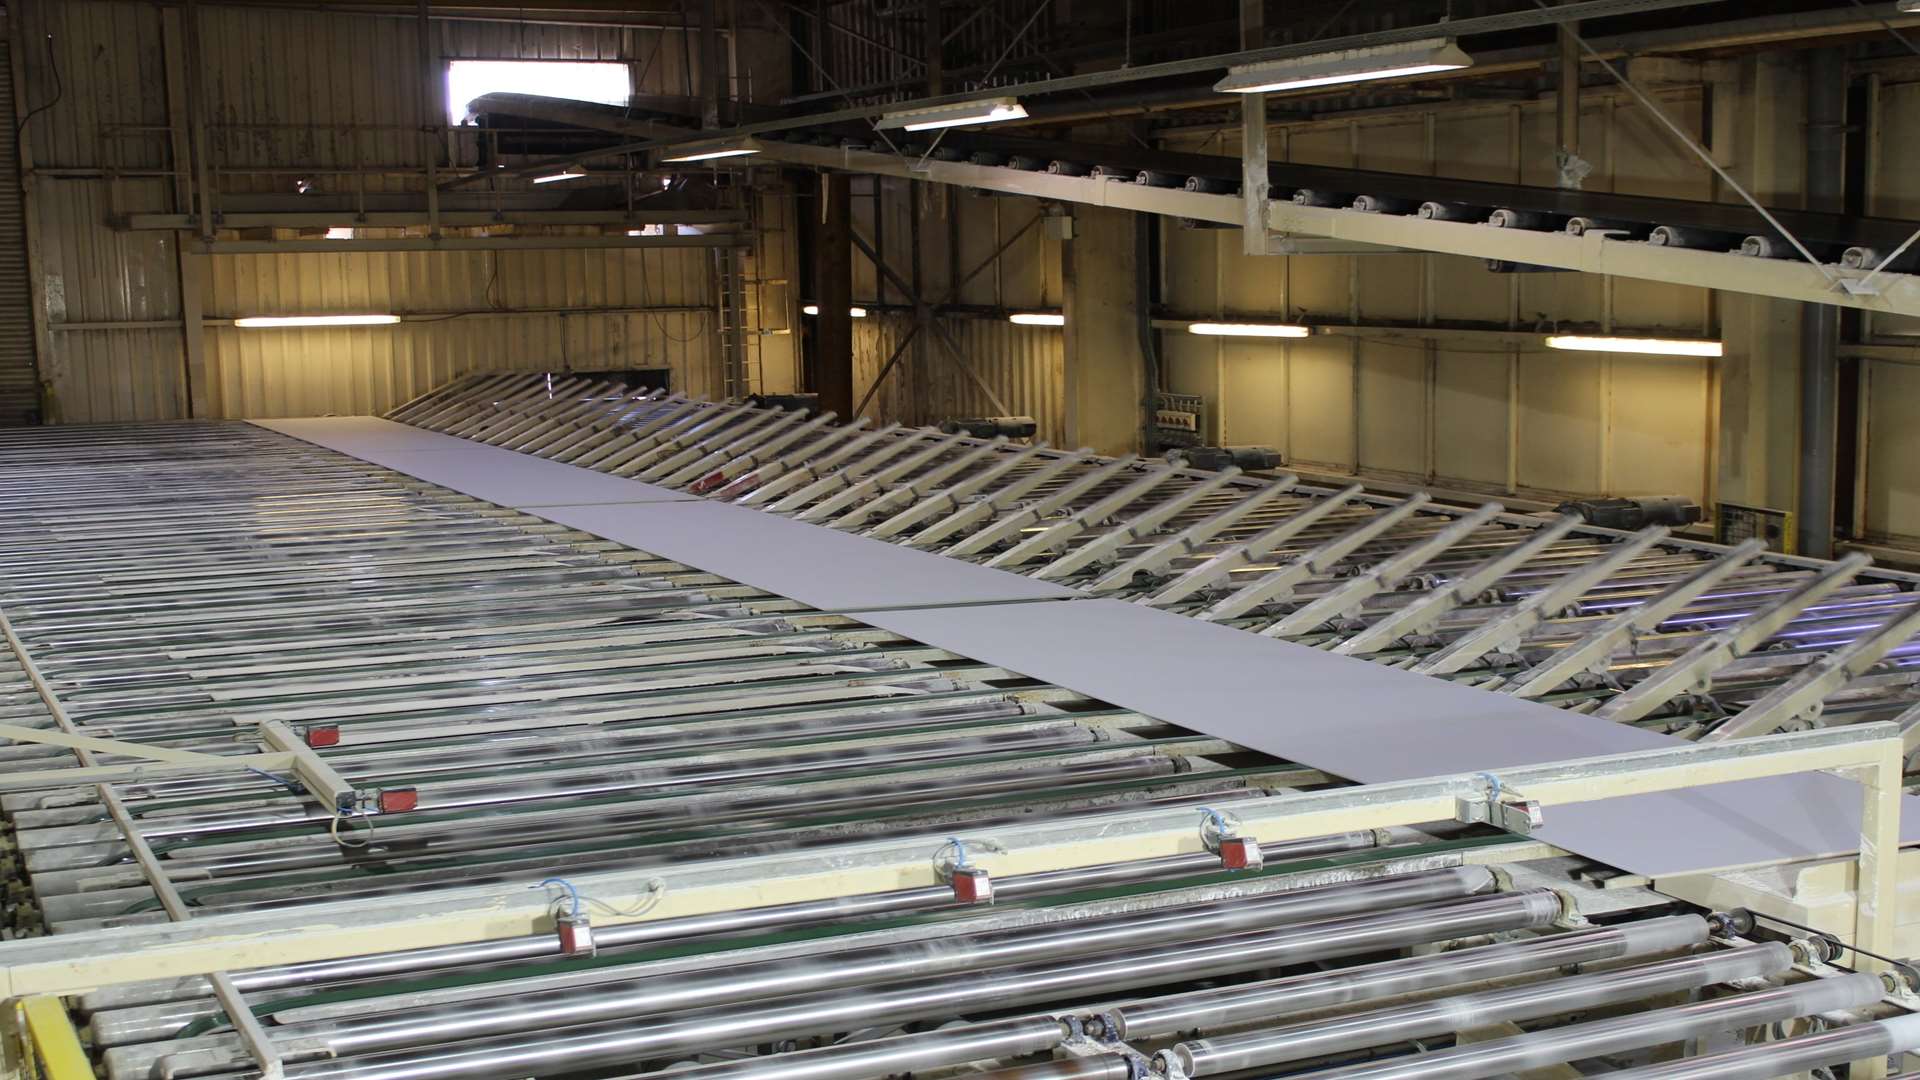 Sheets of cut plasterboard are automatically flipped in a u-turn at the end of the quarter-mile production line